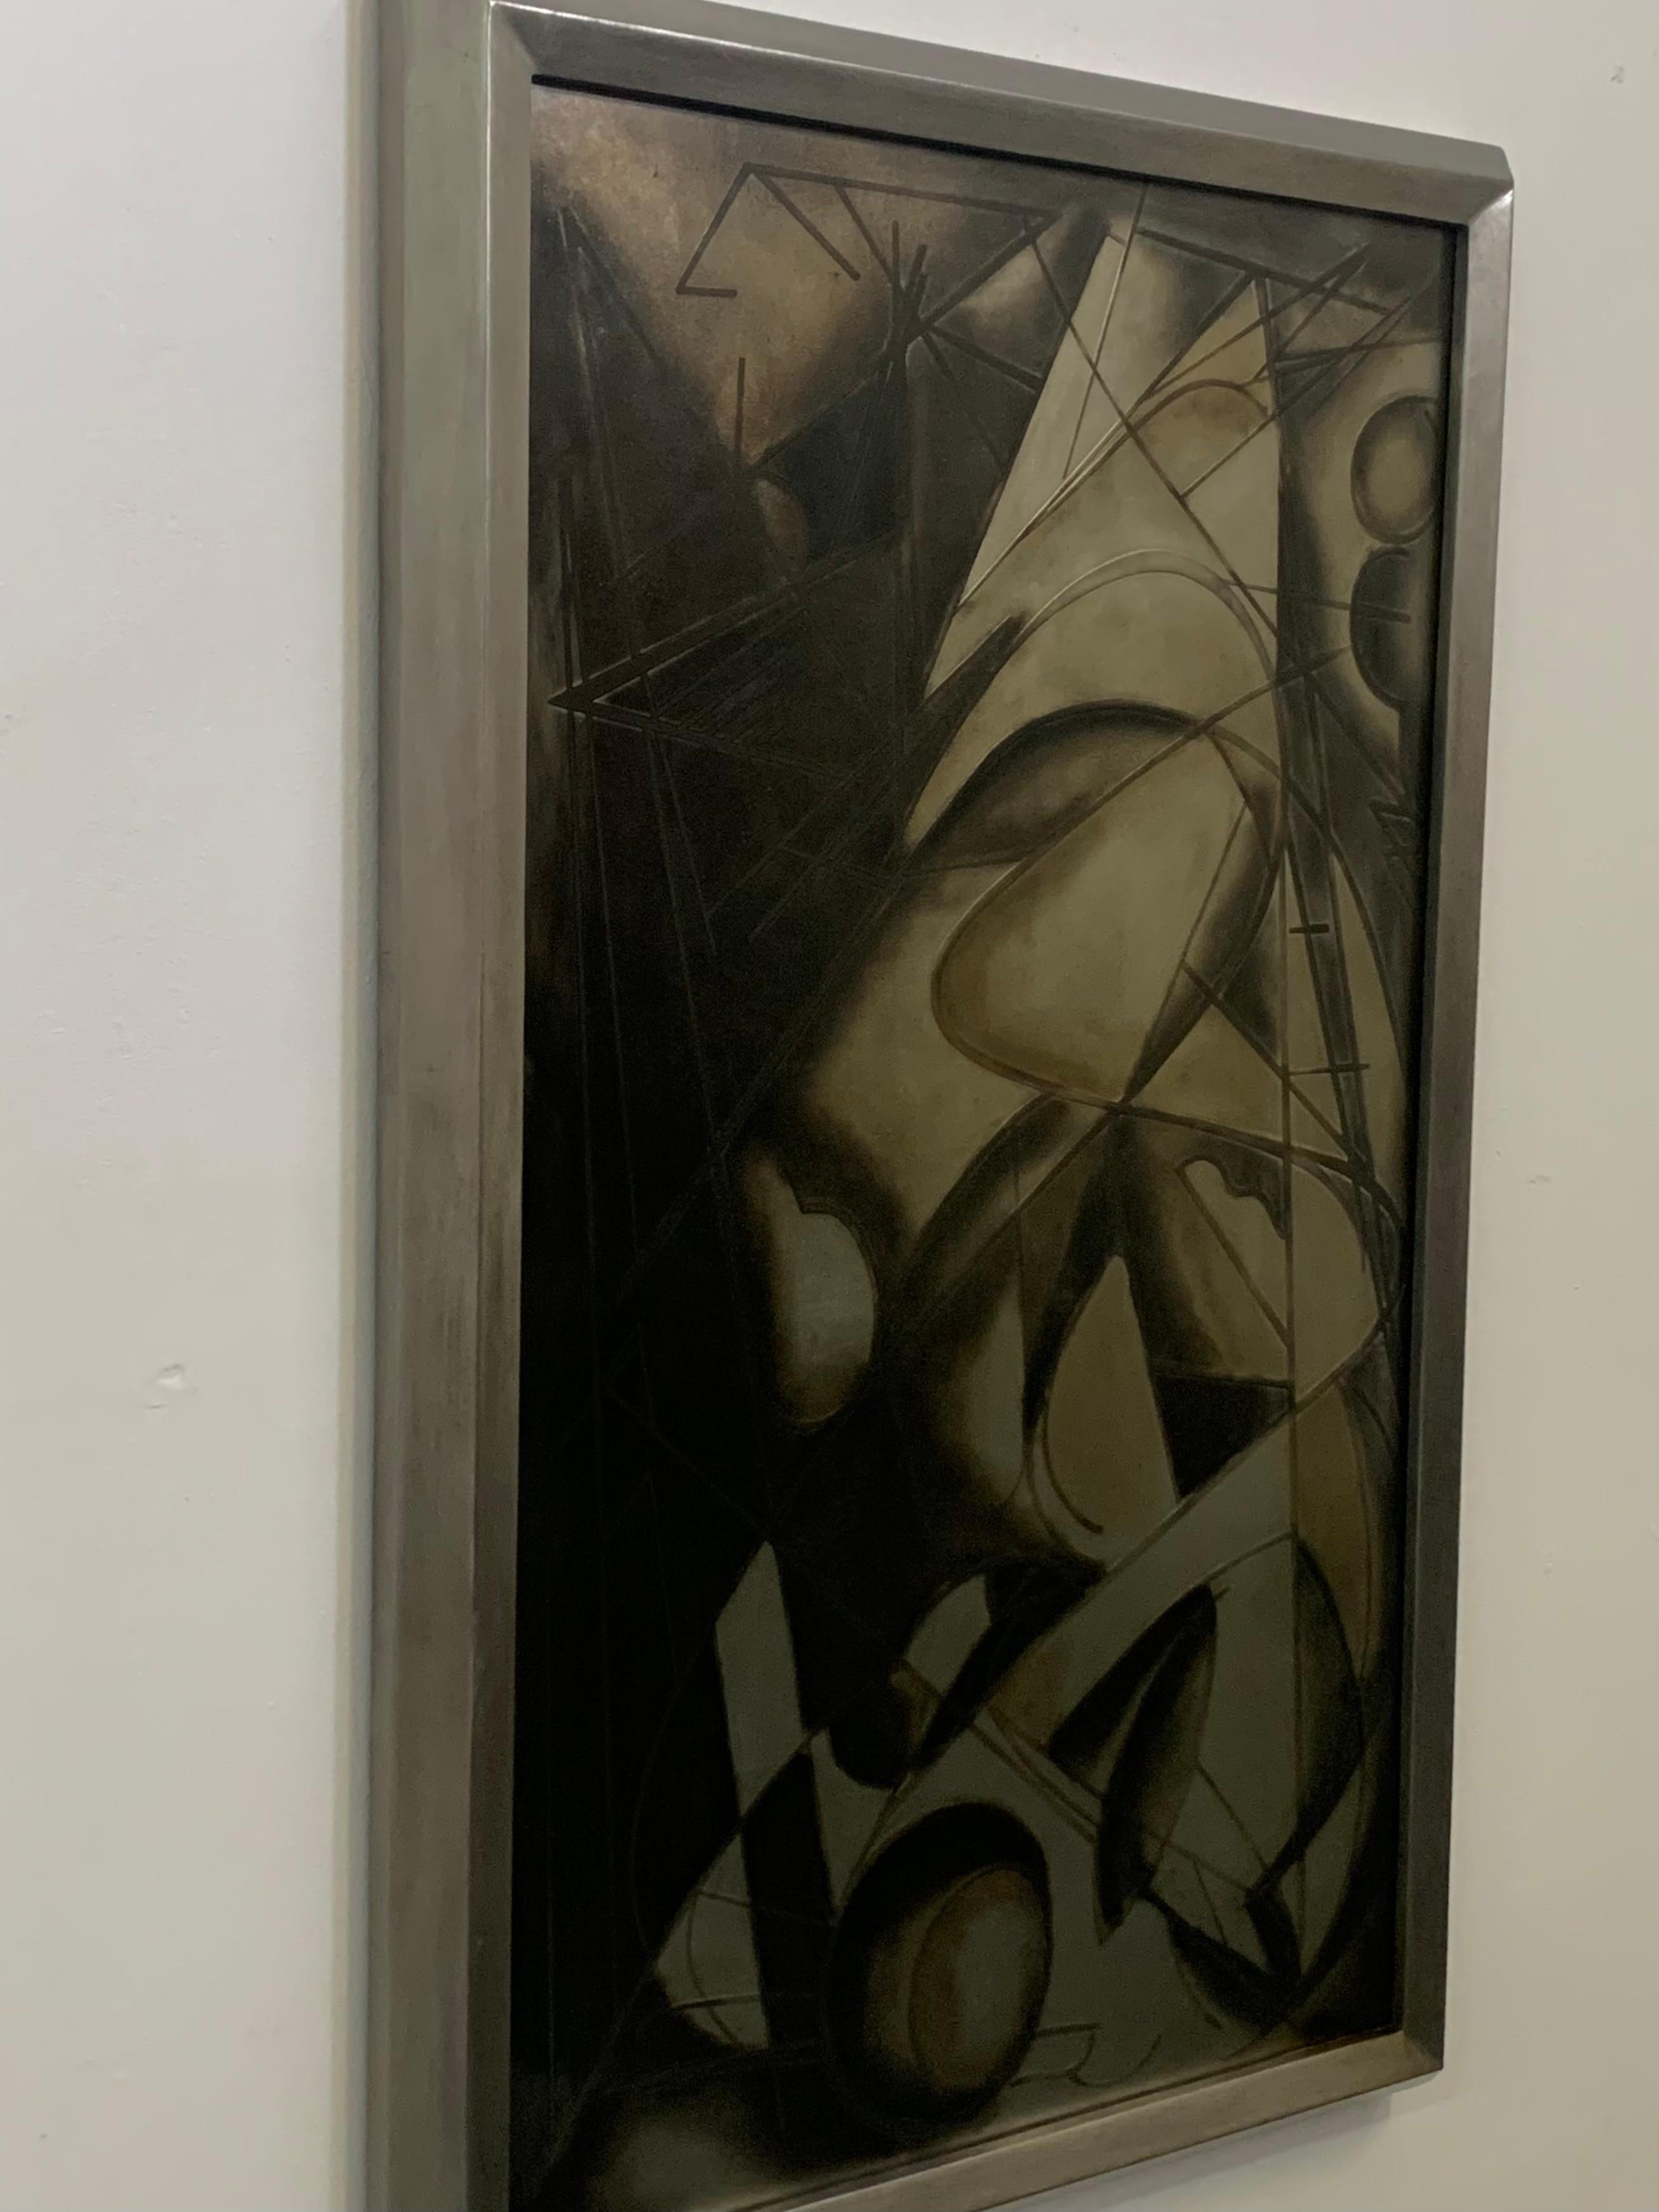 A beautiful and exclusive work on back-treated glass, the mixed media painting on the back of the glass appears with several relief lines running through the work identifying the futurist design. The colours are shades of grey with hints of light